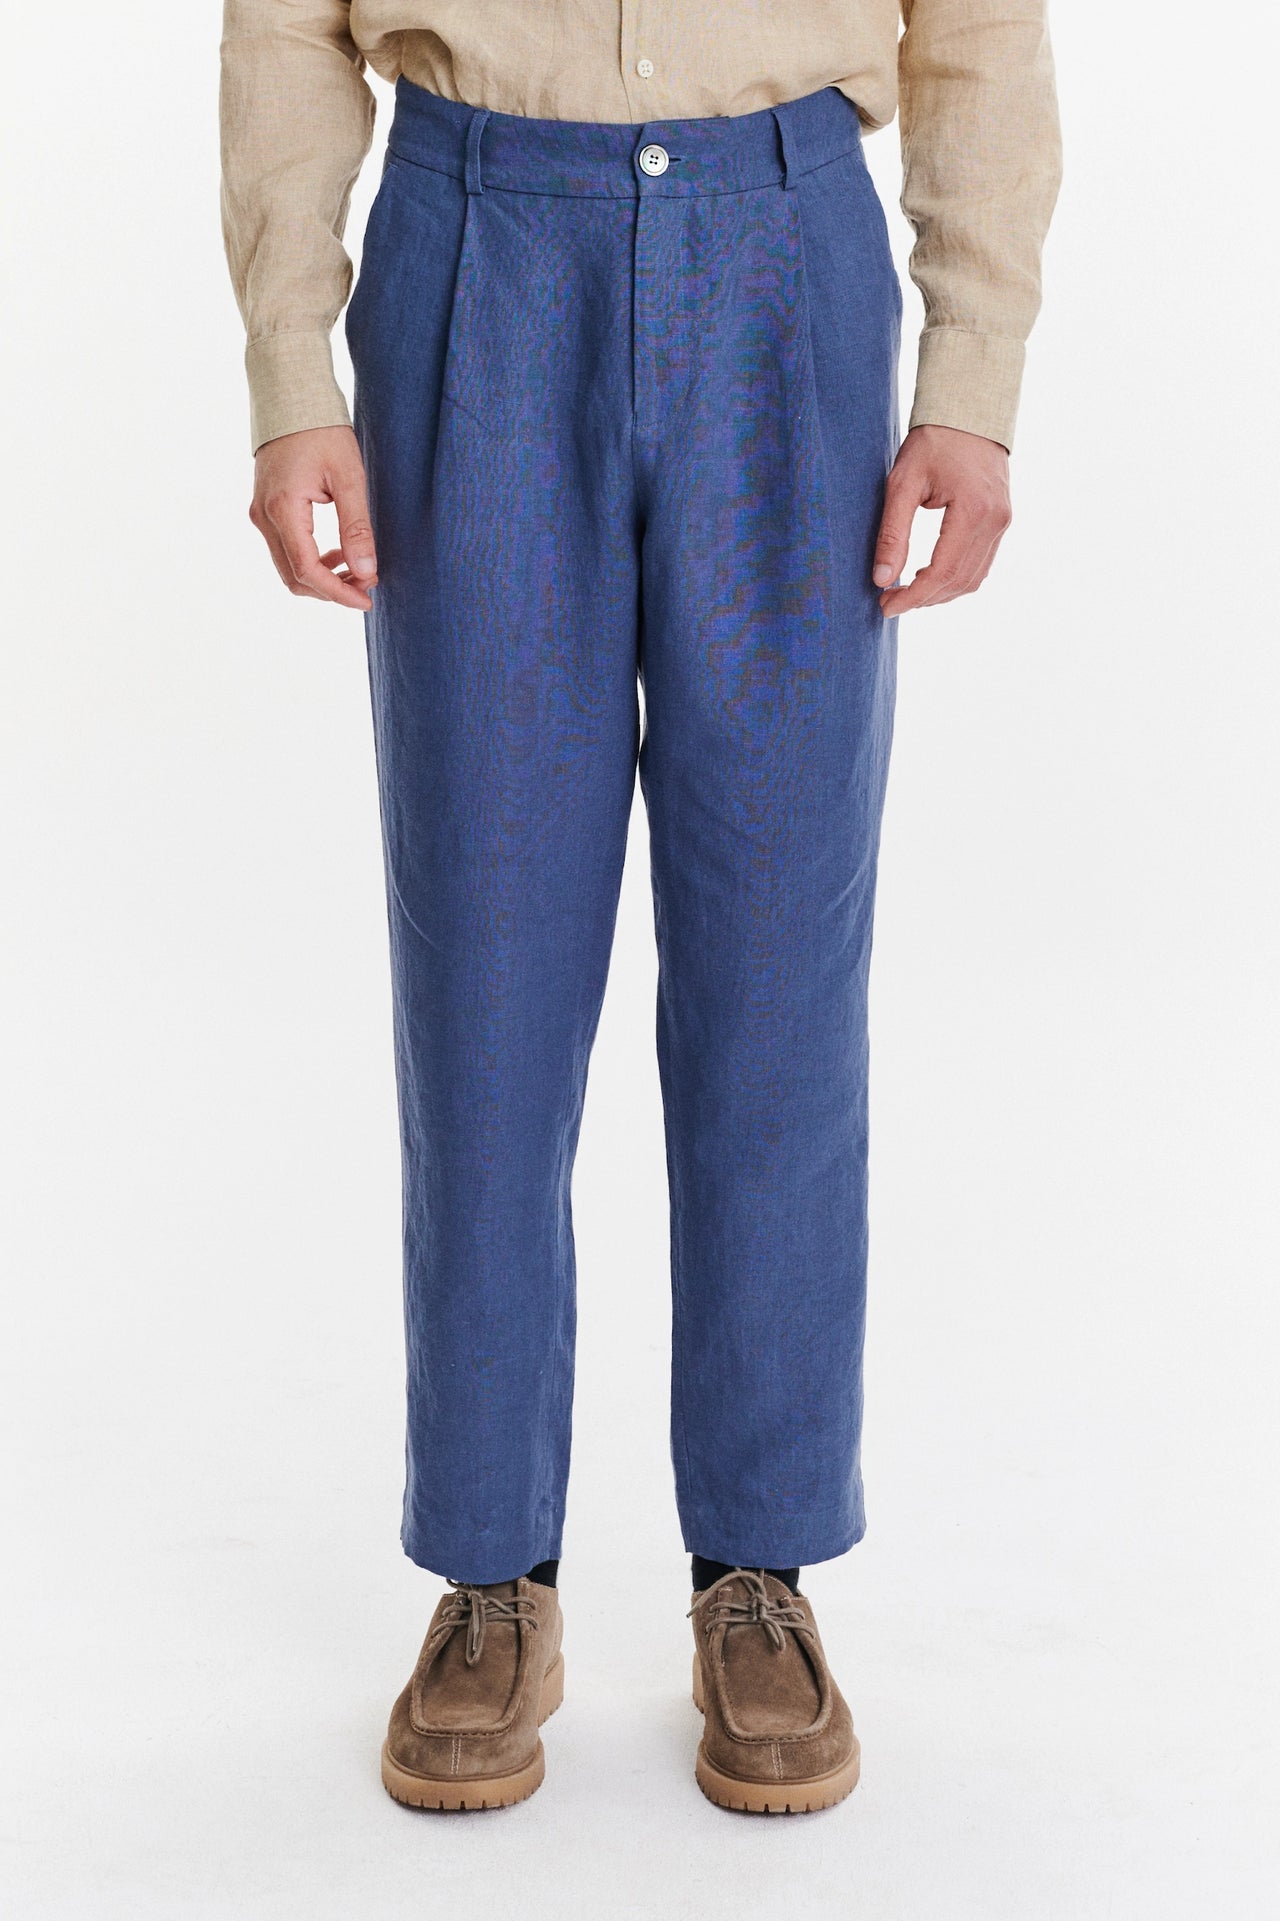 Genuine Trousers in a Police Blue Fine Sustainable Belgian Linen